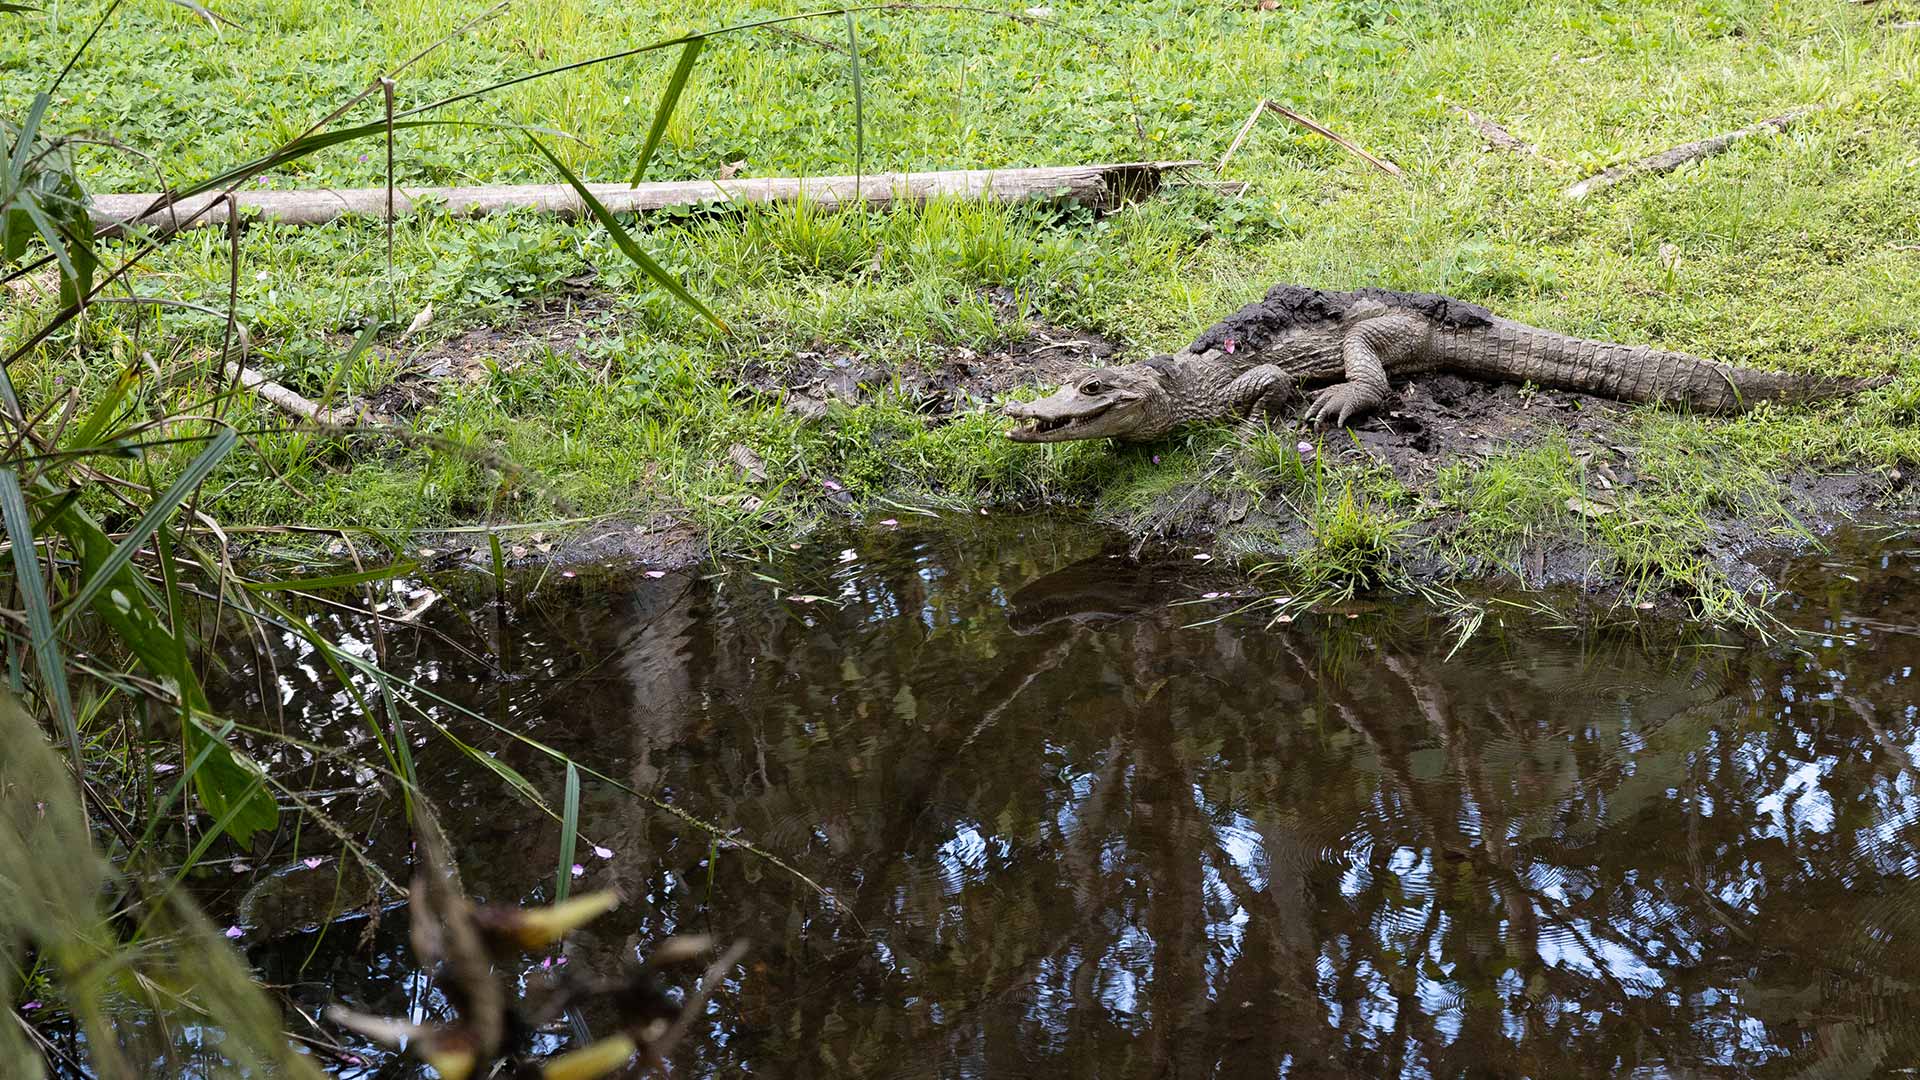 A caiman with mud on his back; probably to help him keep cool. Seen at the Yanacocha Animal Rescue Center in Puyo, Ecuador, on an alternative Baños waterfall tour with Impactful Travel